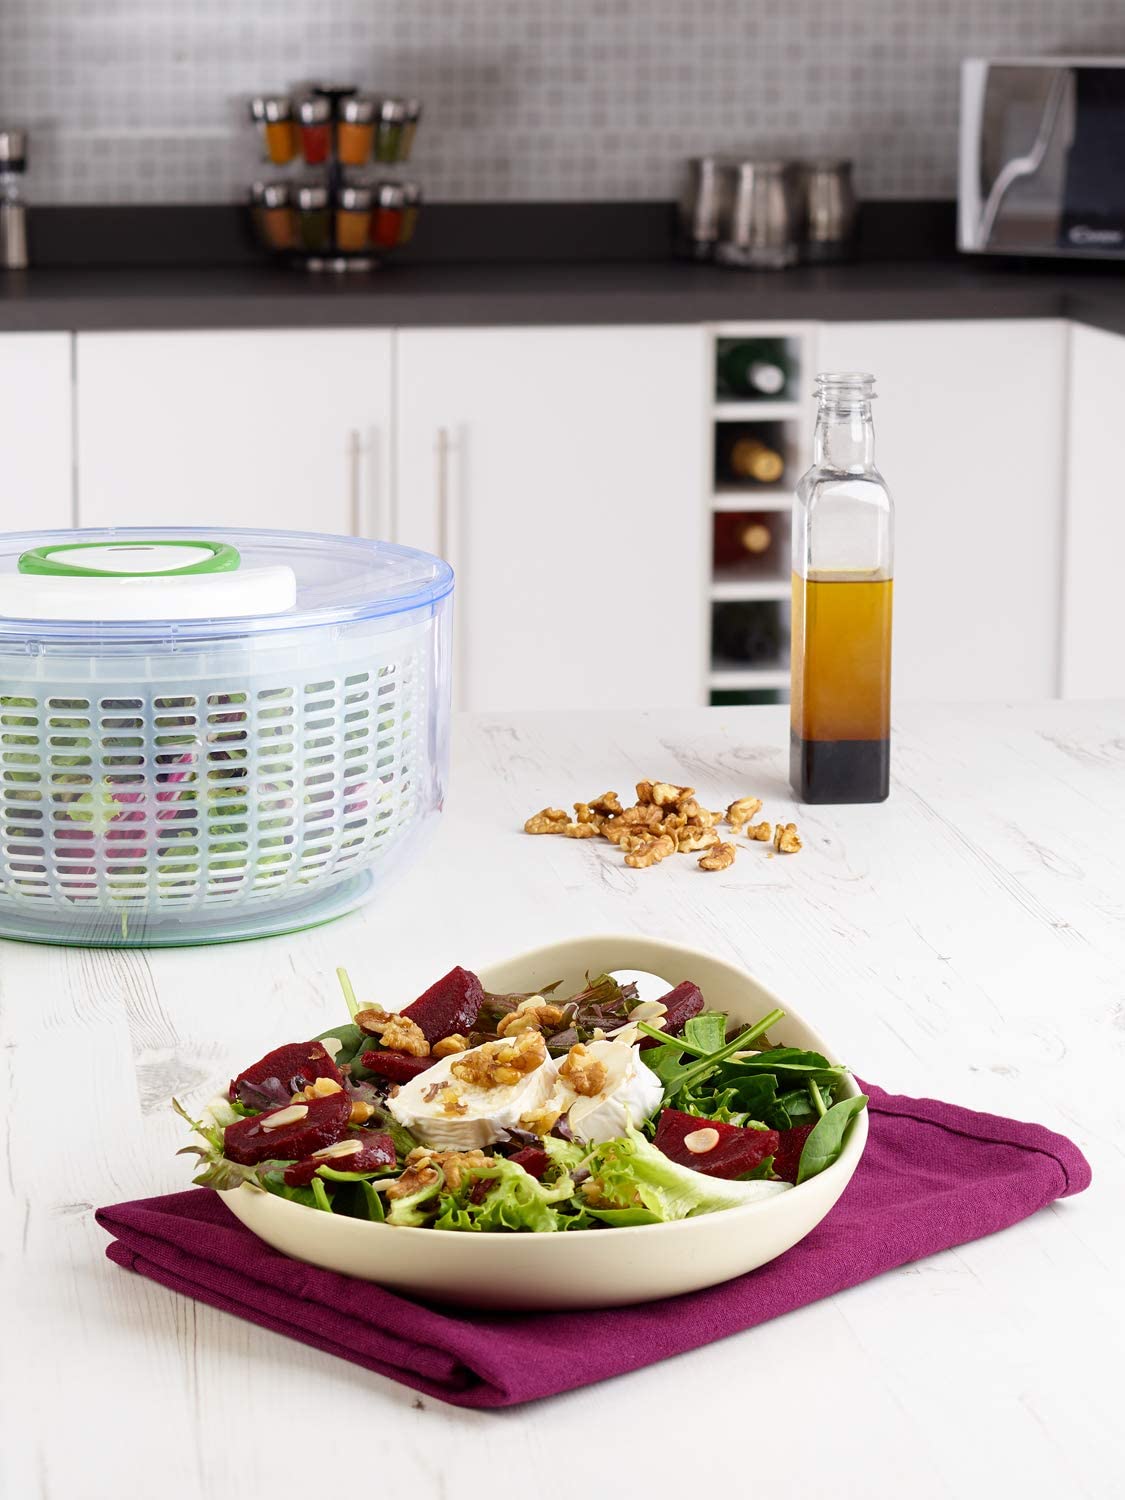 Zyliss Large Salad Spinner